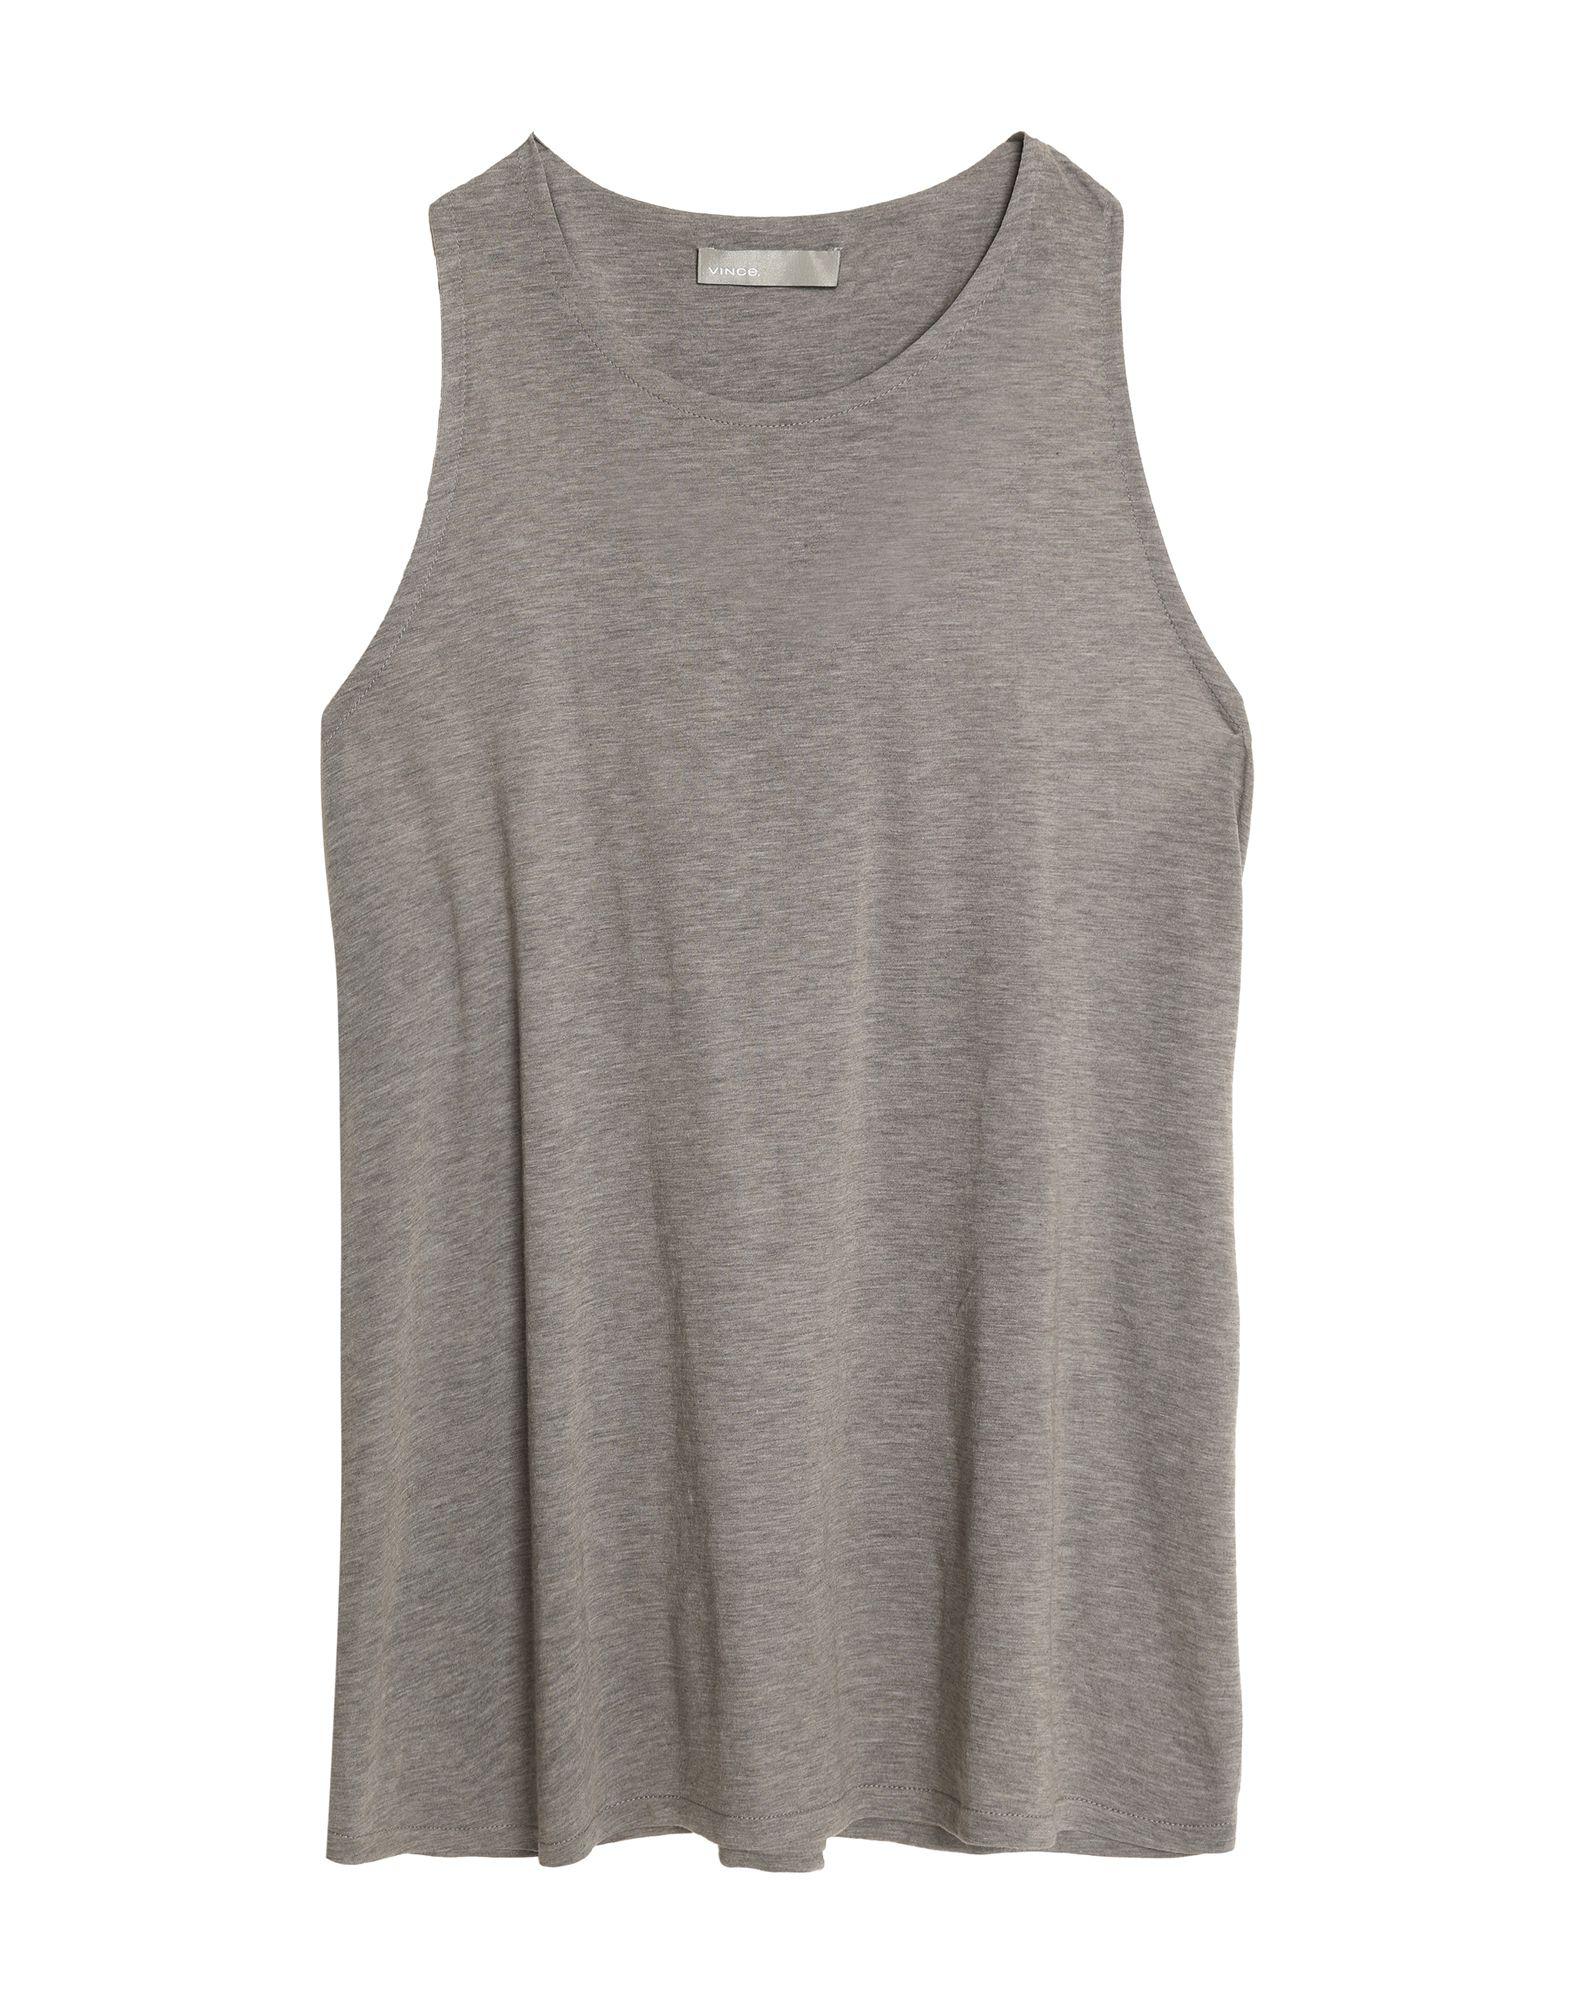 Vince Cotton Tank Top in Grey (Gray) - Lyst